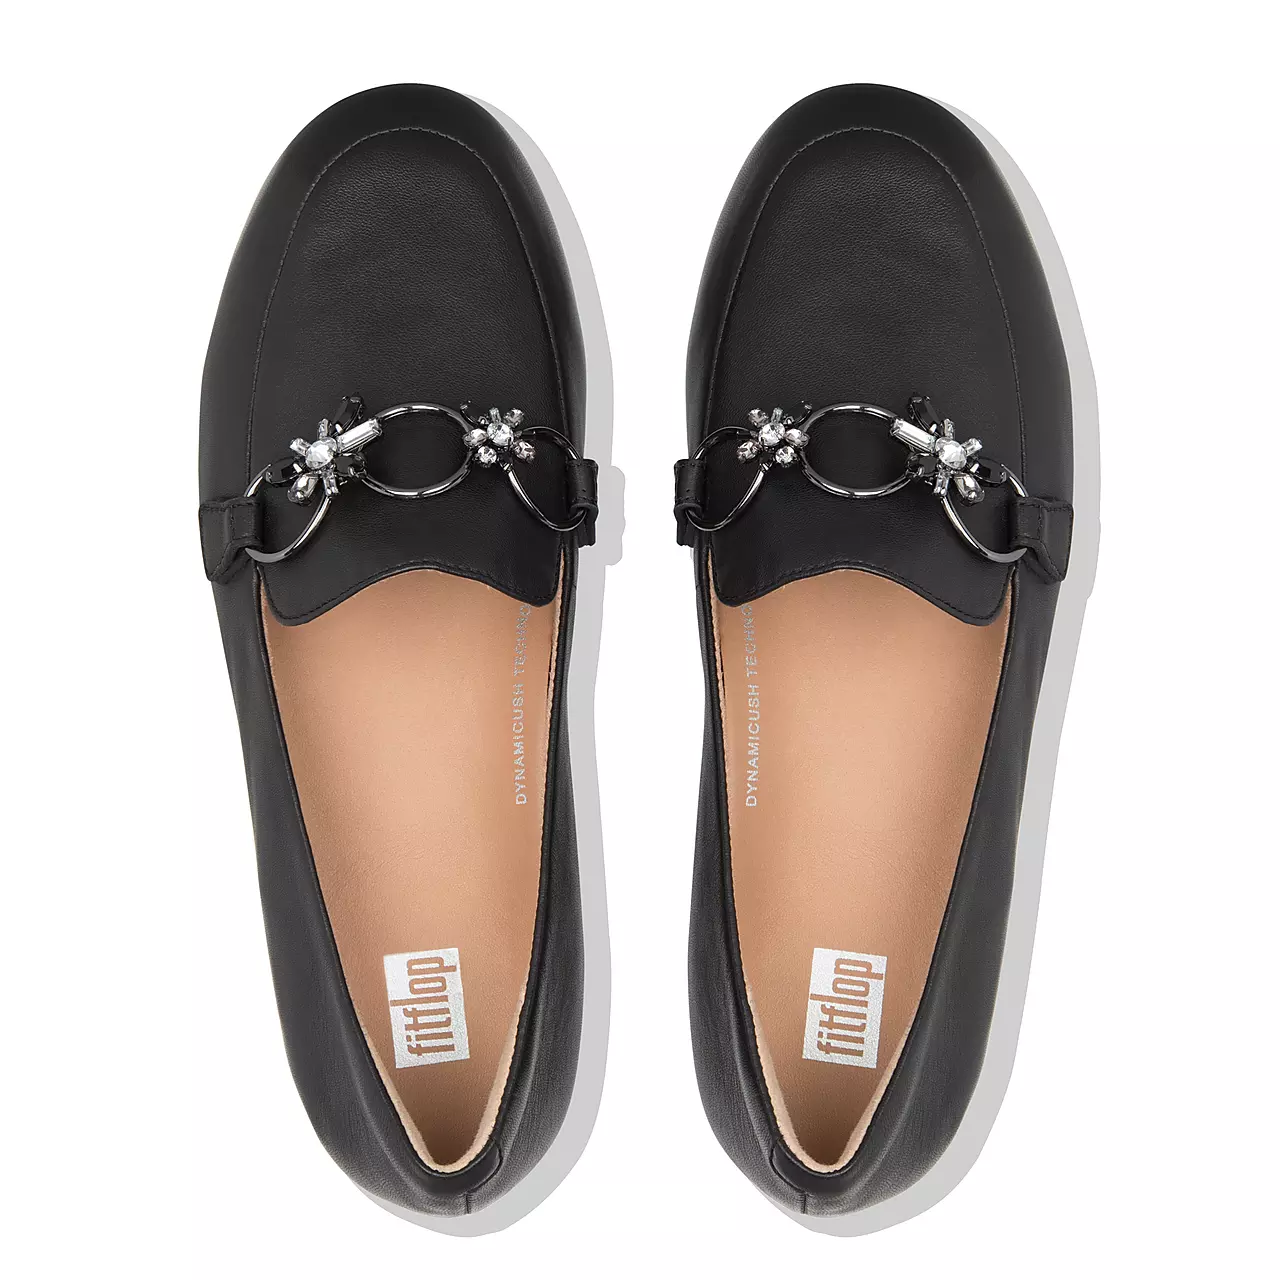 Blossom leather loafers